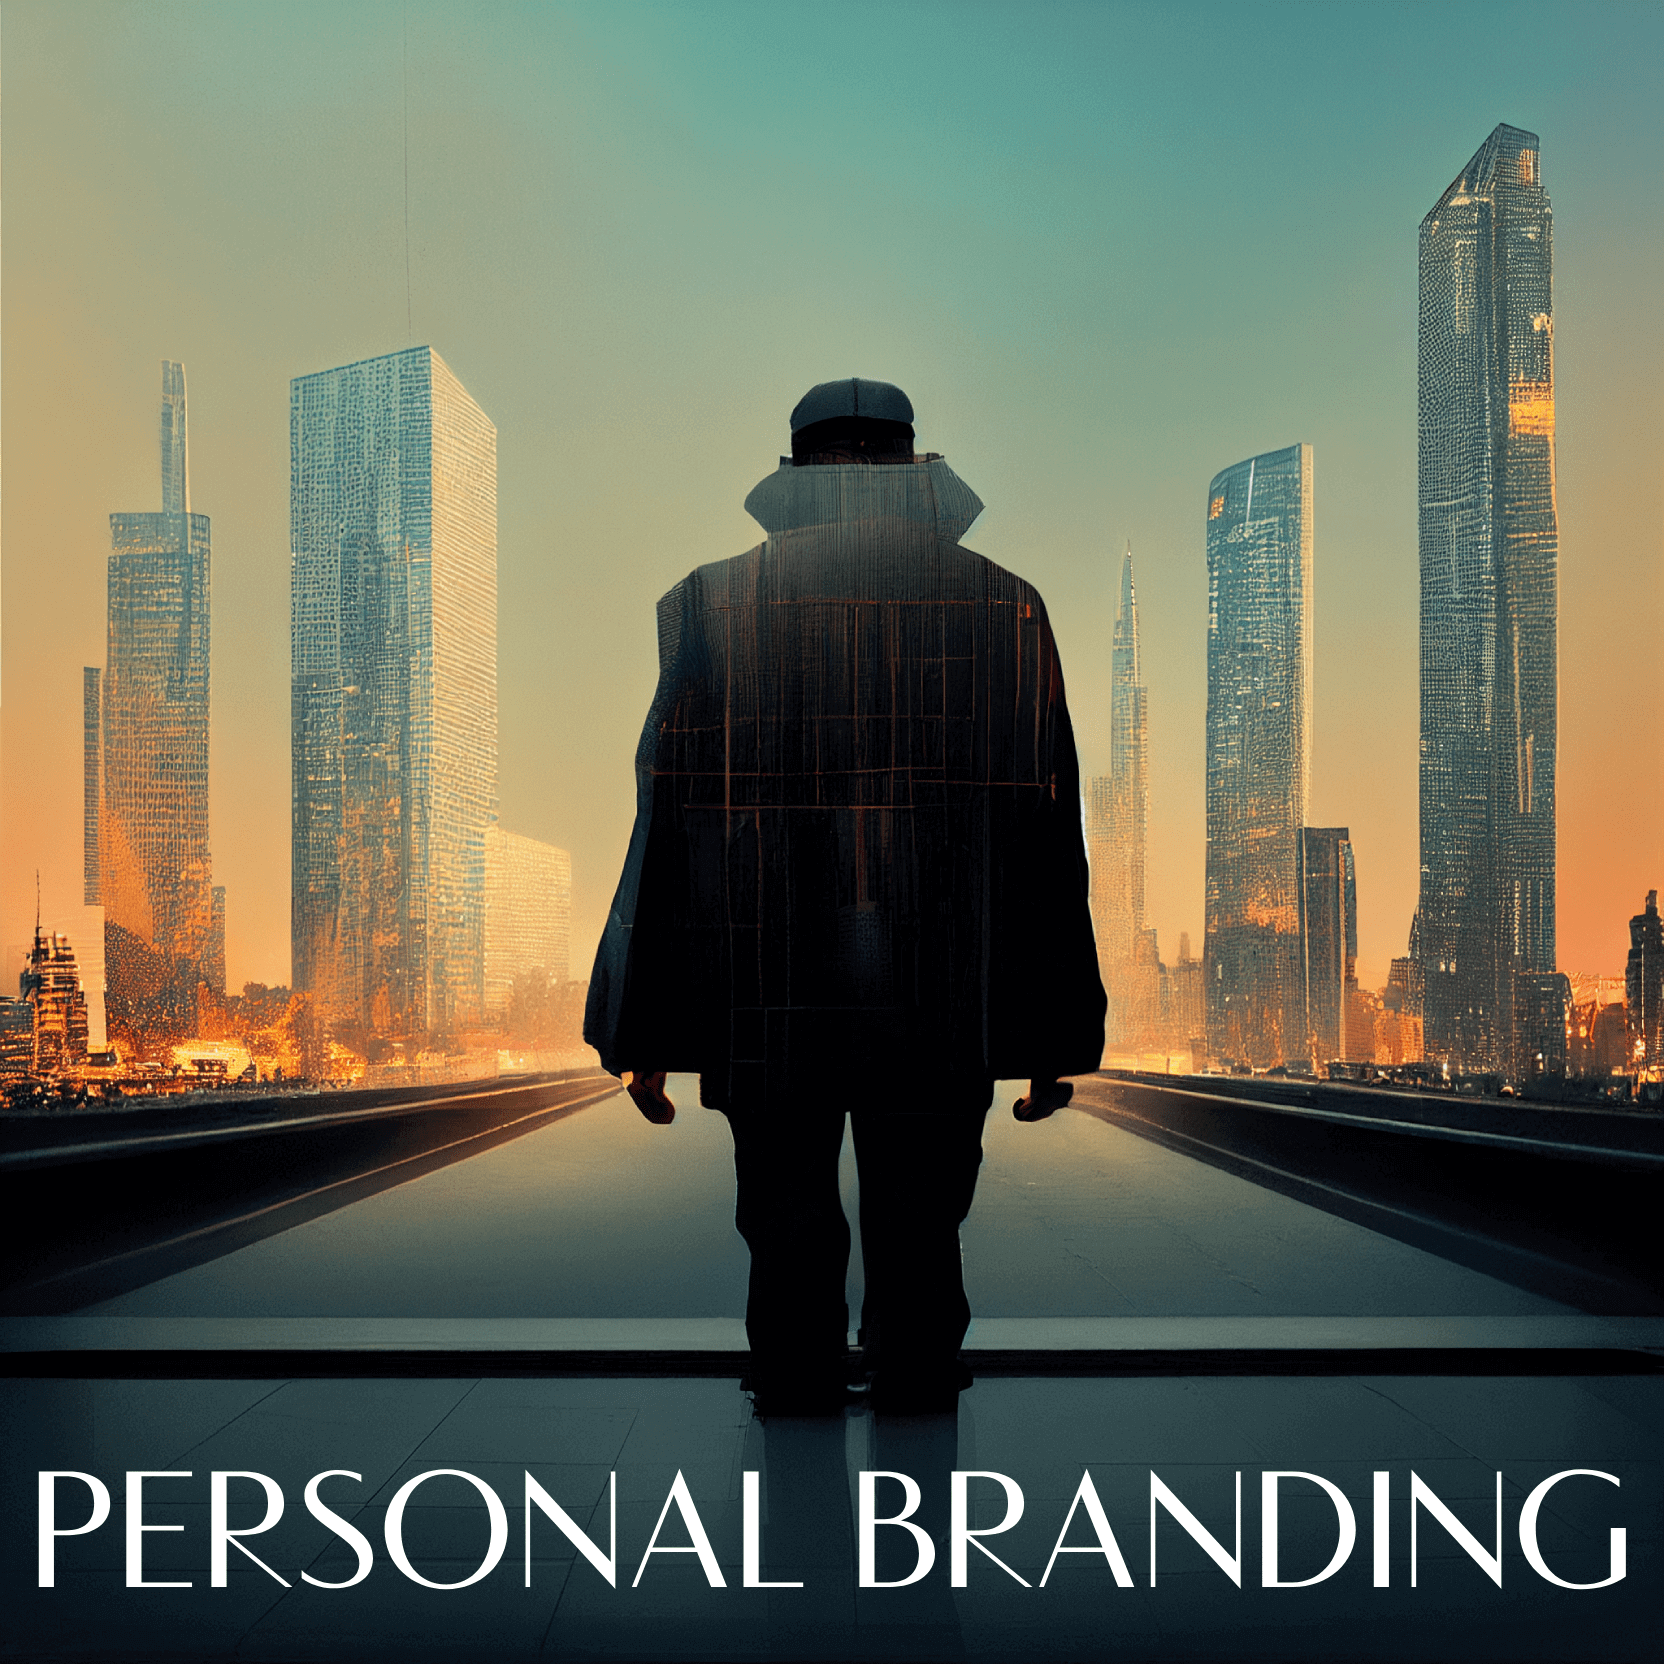 What is Personal Branding and Why Is It Important?